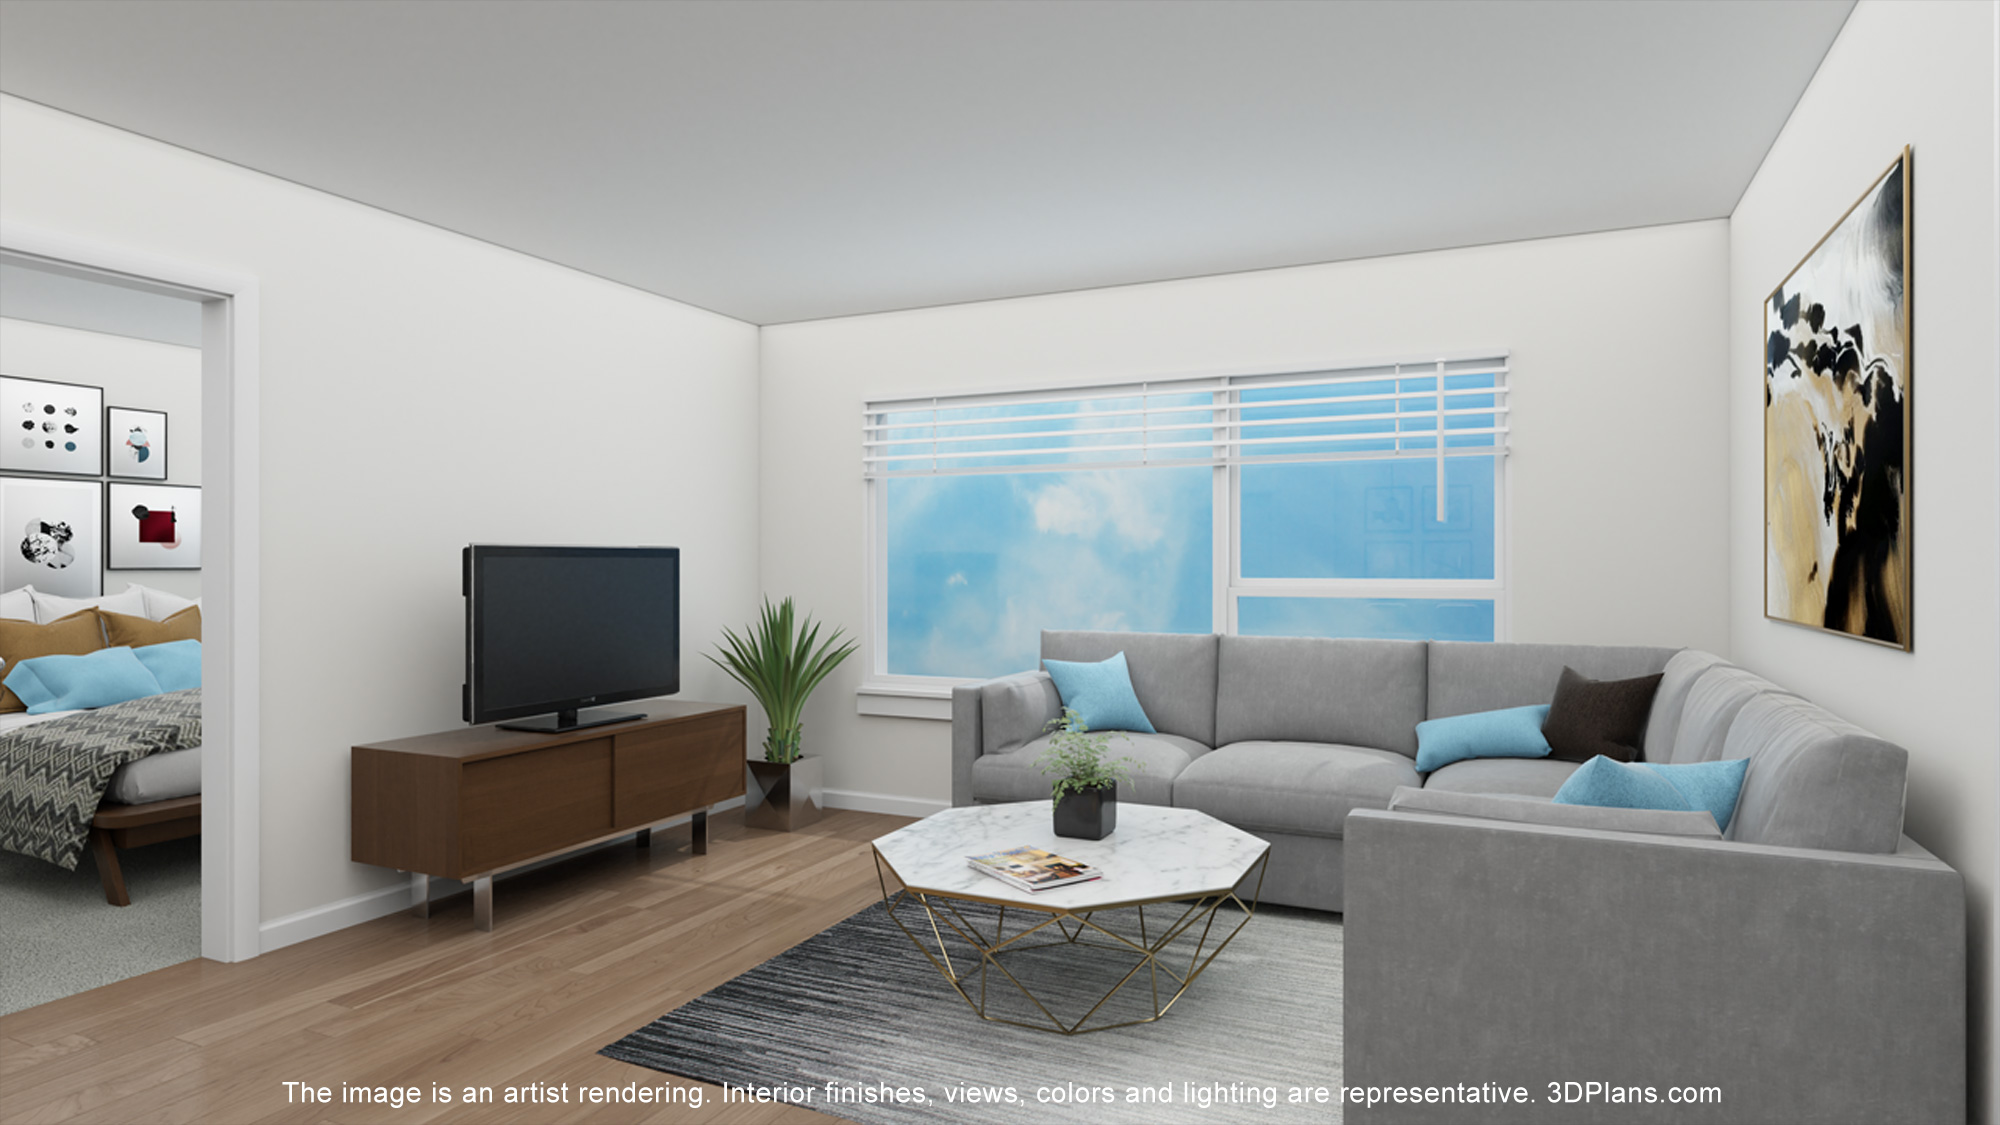 Axis at Ansel interior living room rendering